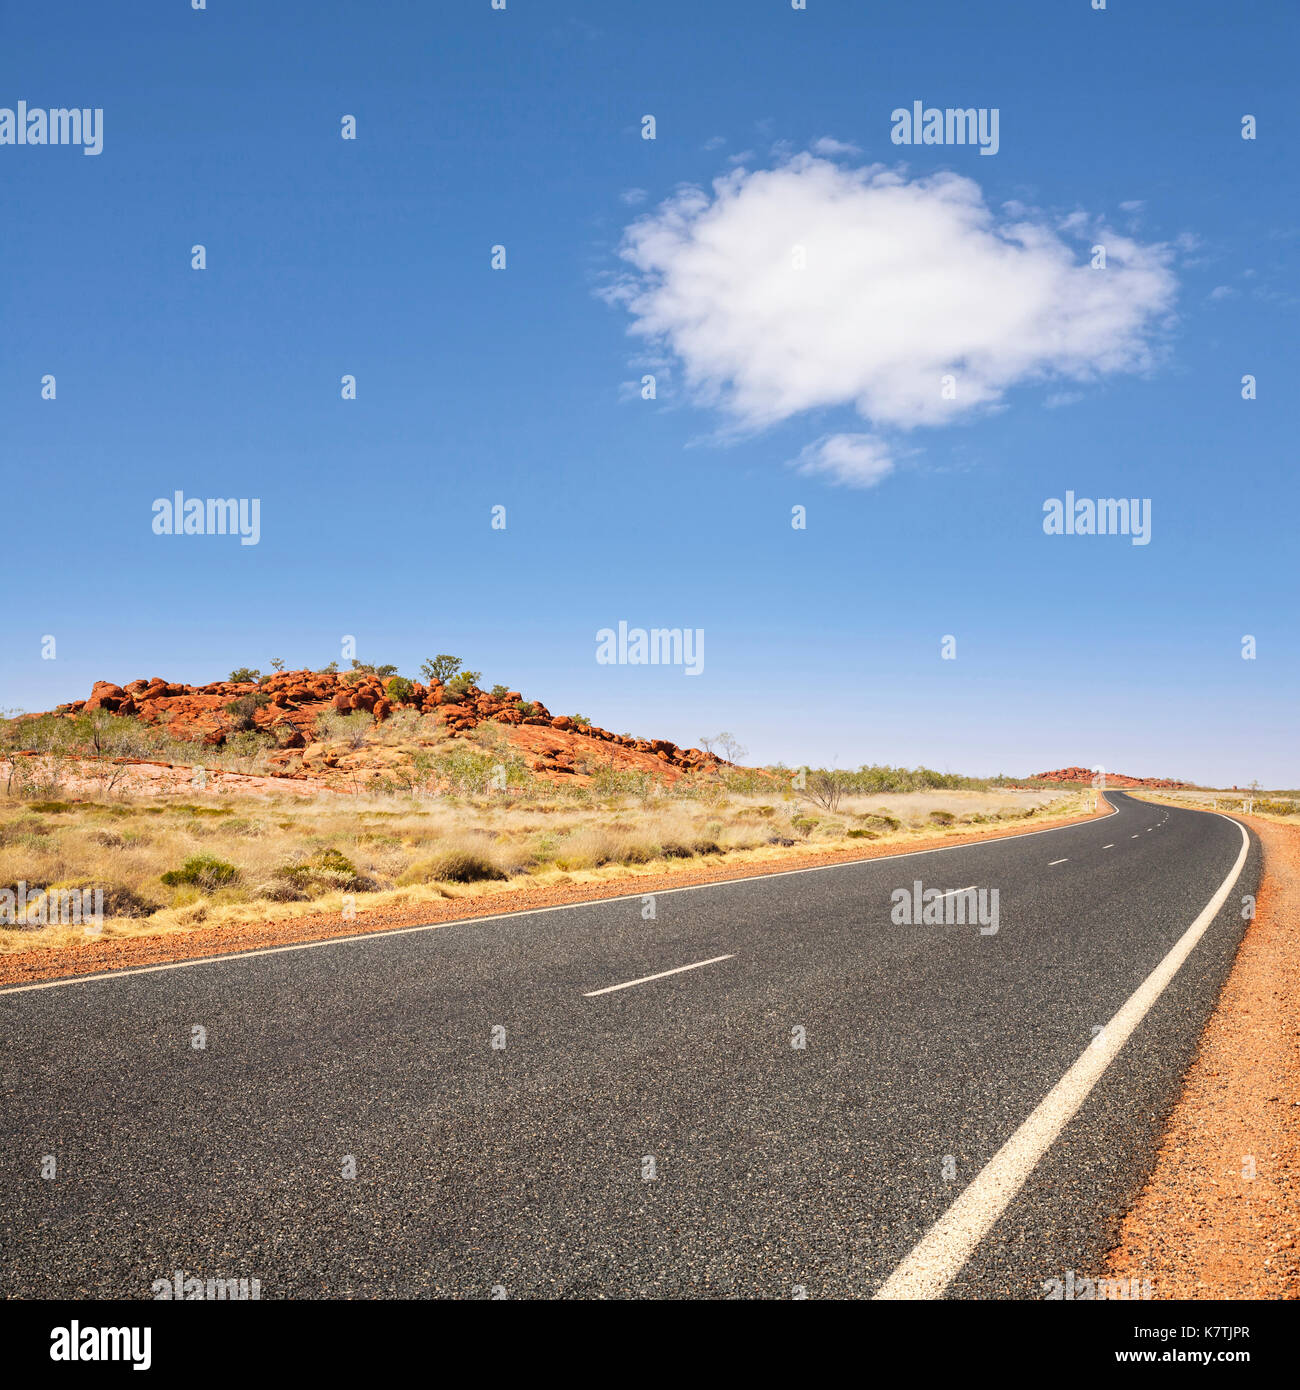 Long curving road stretching into the distance in the Pilbara region of Western Australia, under blue sky with single white cloud. Stock Photo